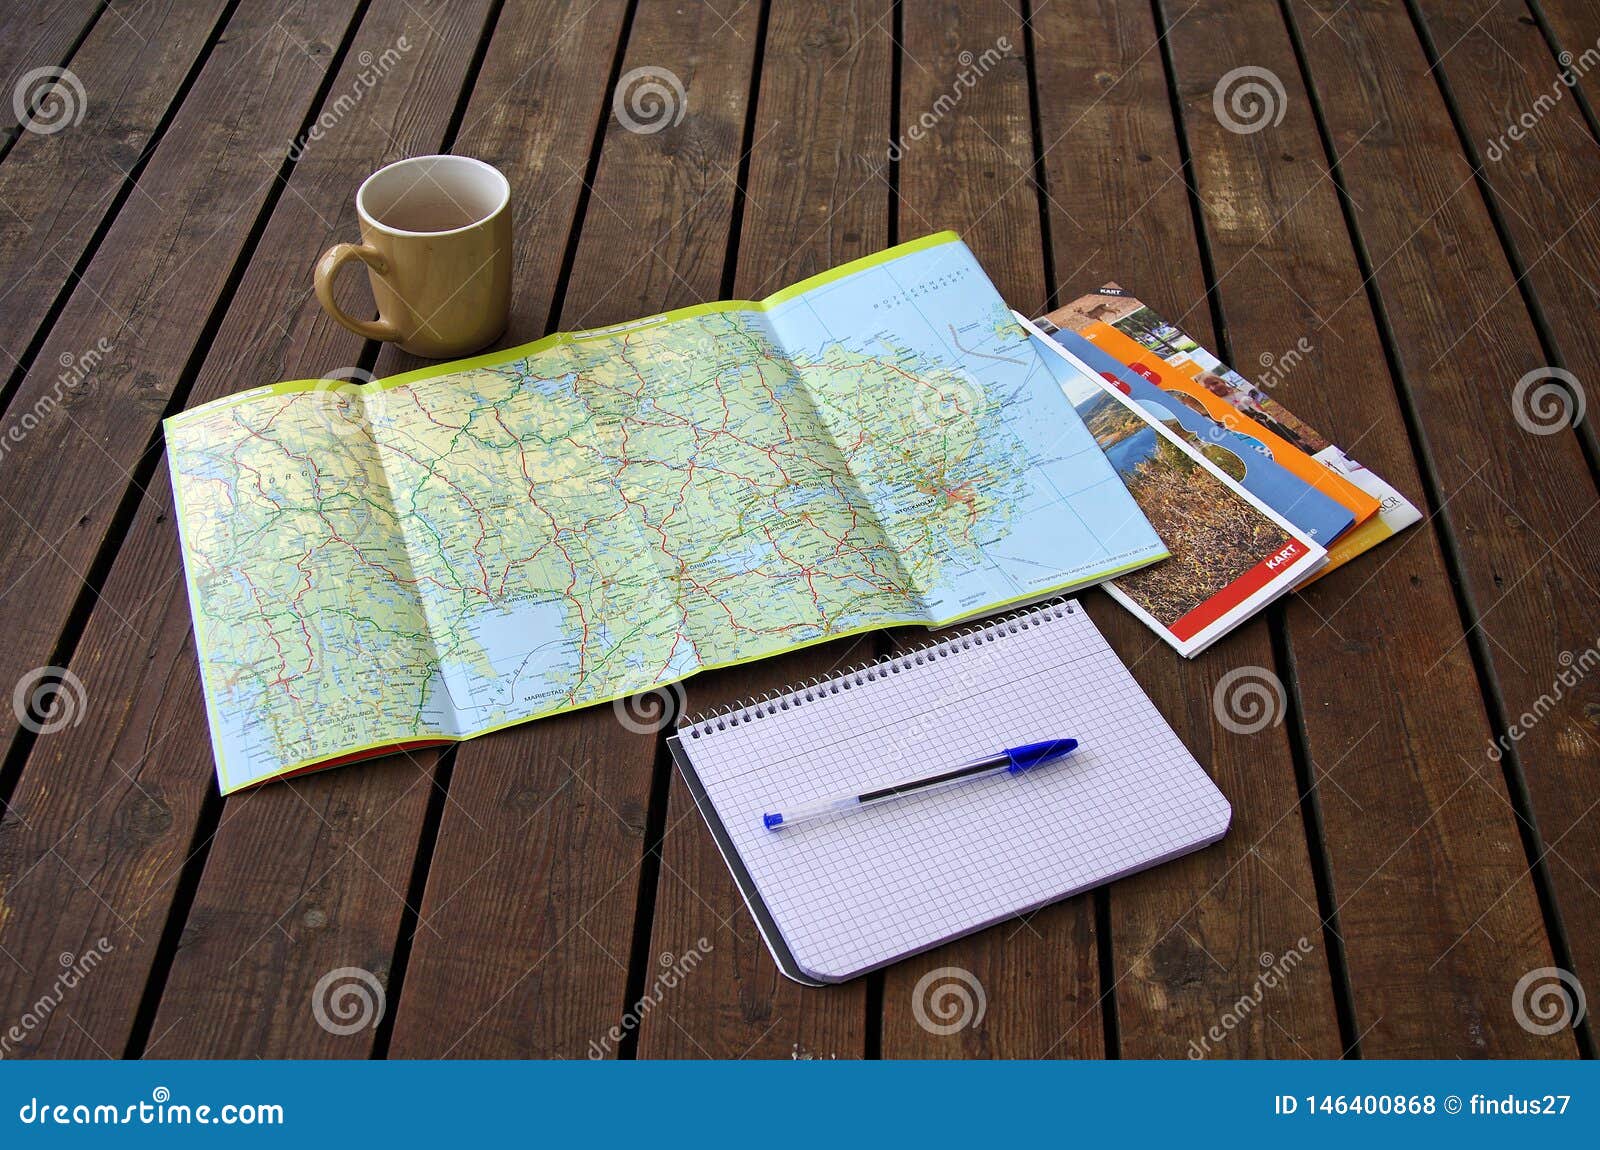 planning a holiday with road maps.